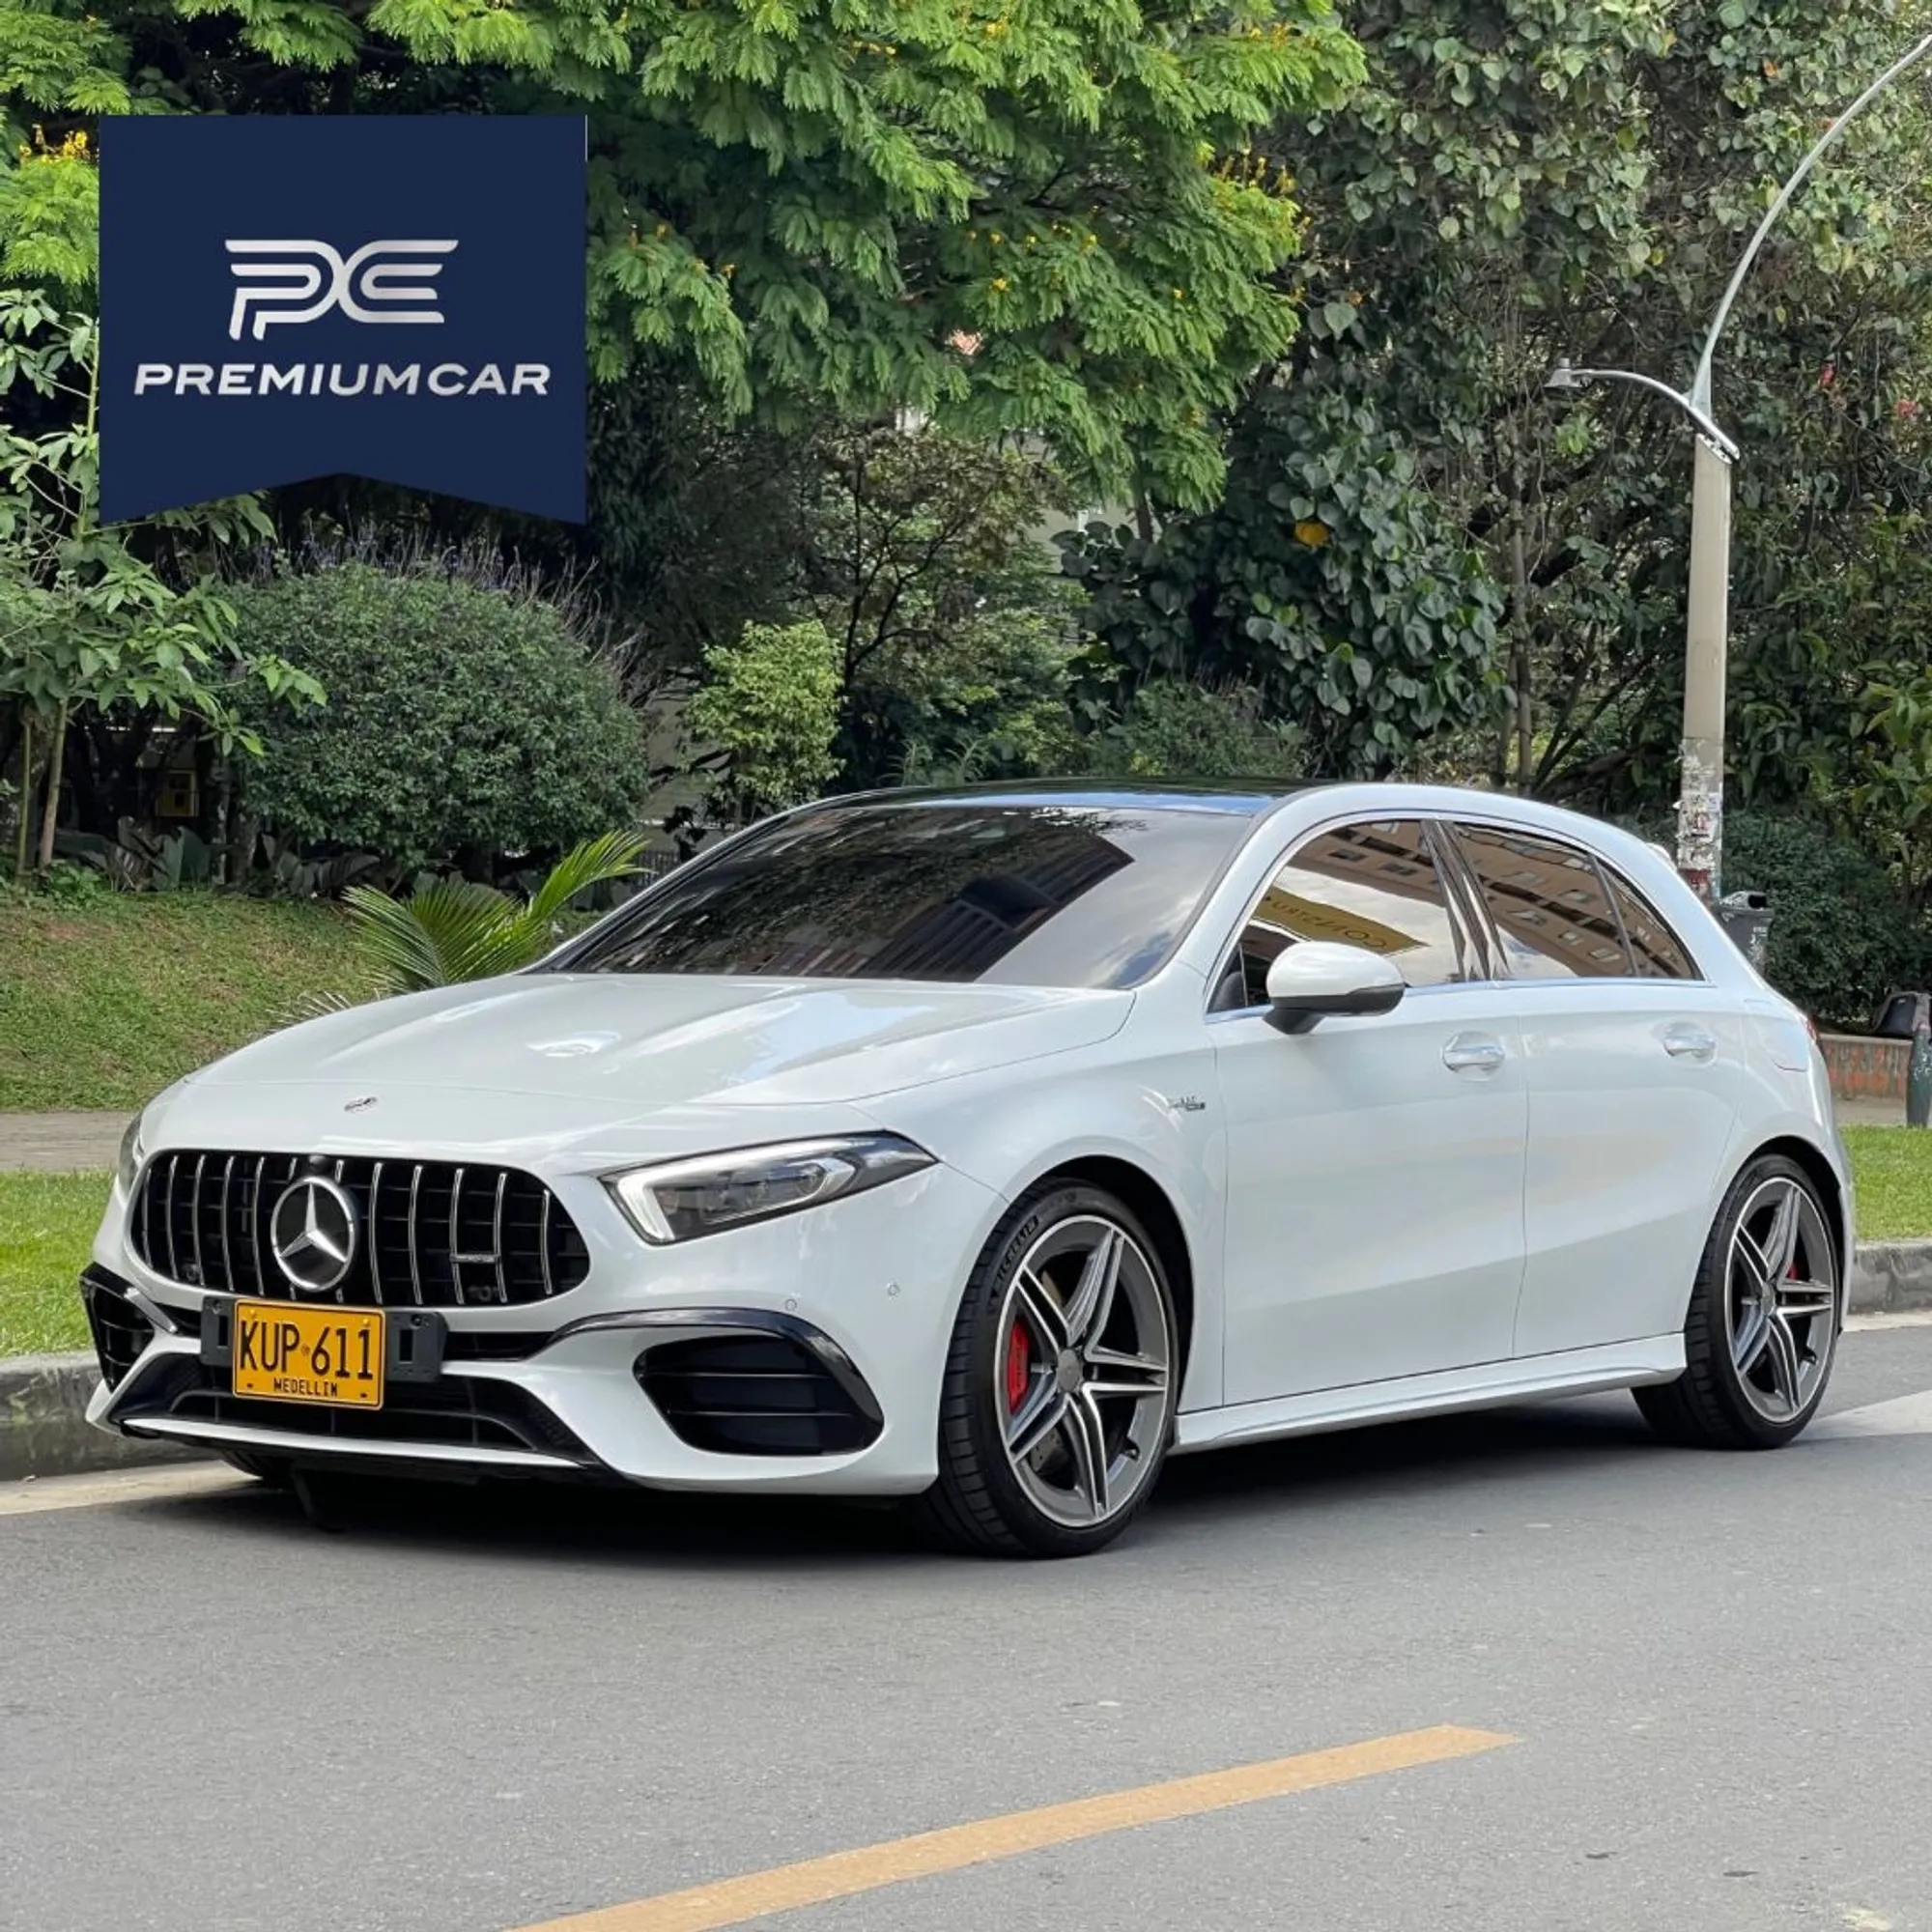 MERCEDES BENZ A45s AMG 4MATIC+ 2.0 TURBO 4X4 AUTOMATICO